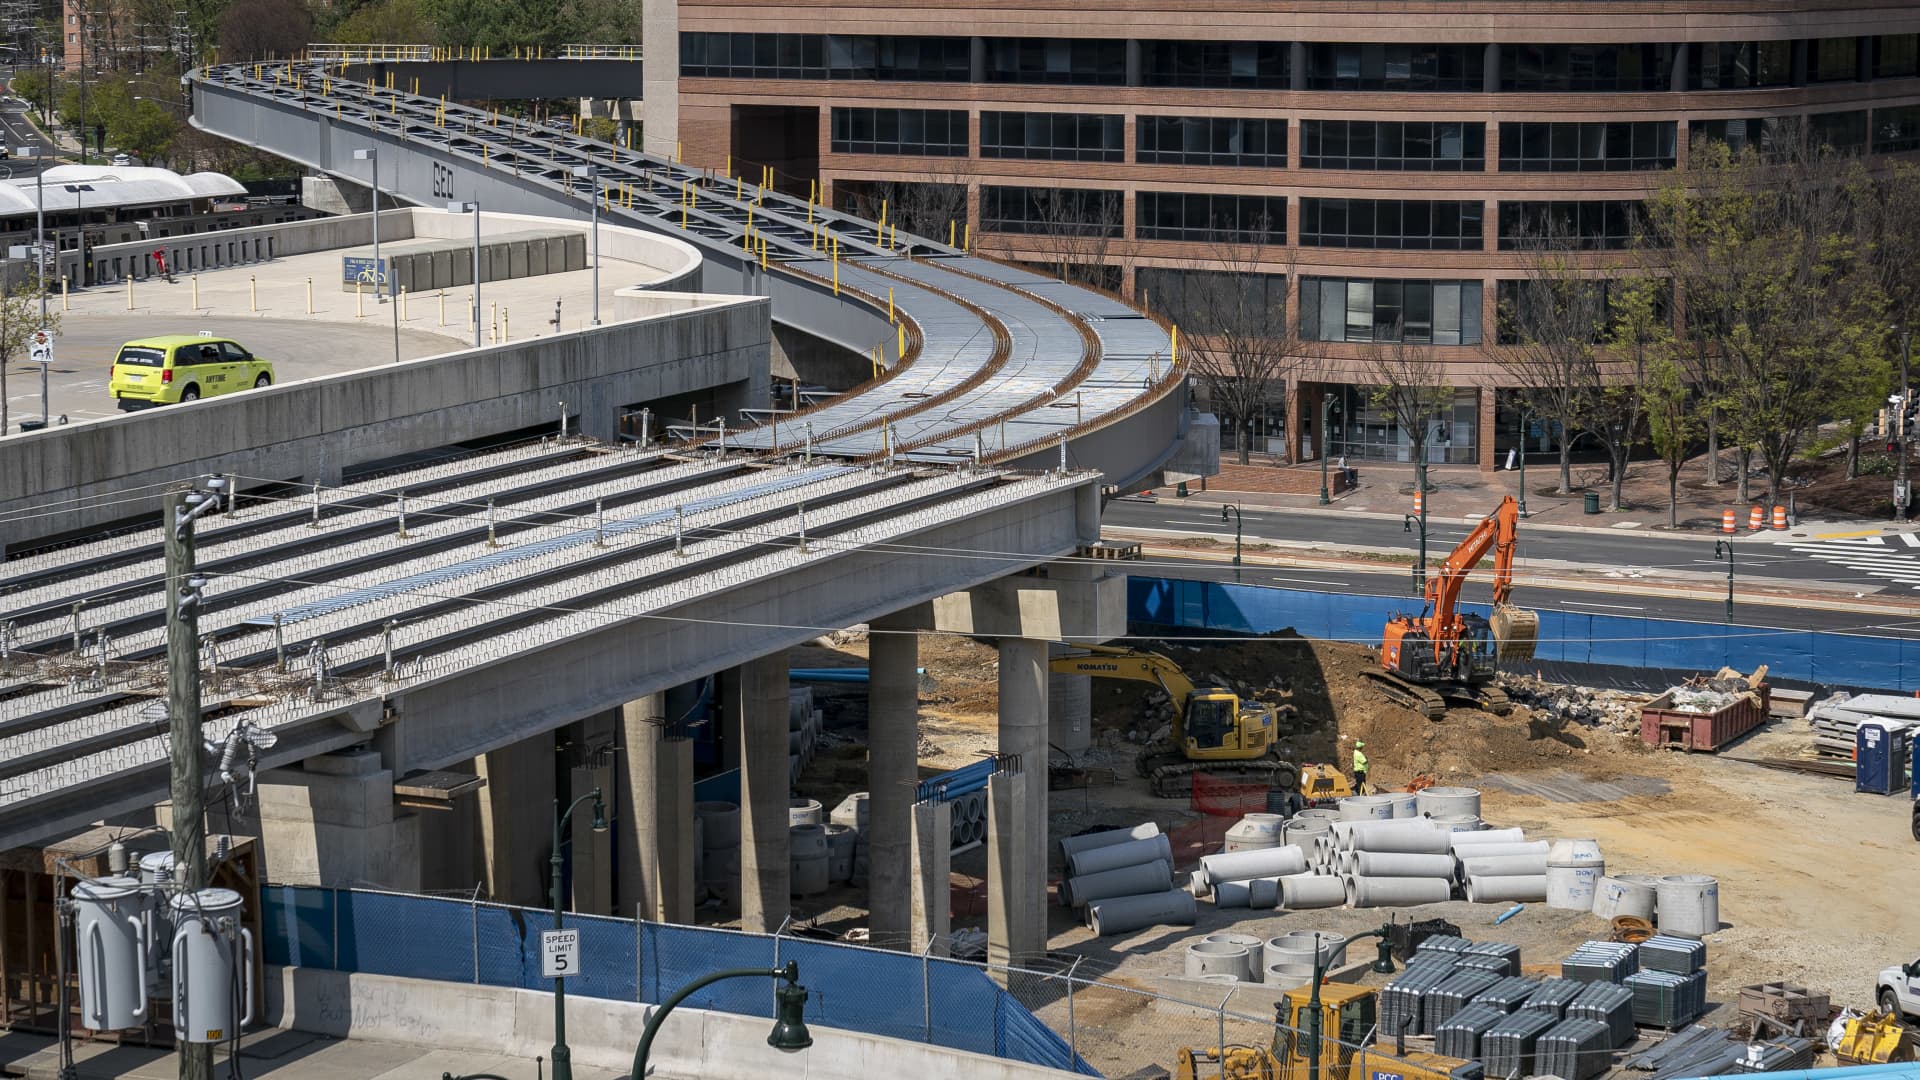 Construction continues near unfinished Purple Line rail tracks at the Paul Sarbanes Transit Center on April 8, 2021 in Silver Spring, Maryland.